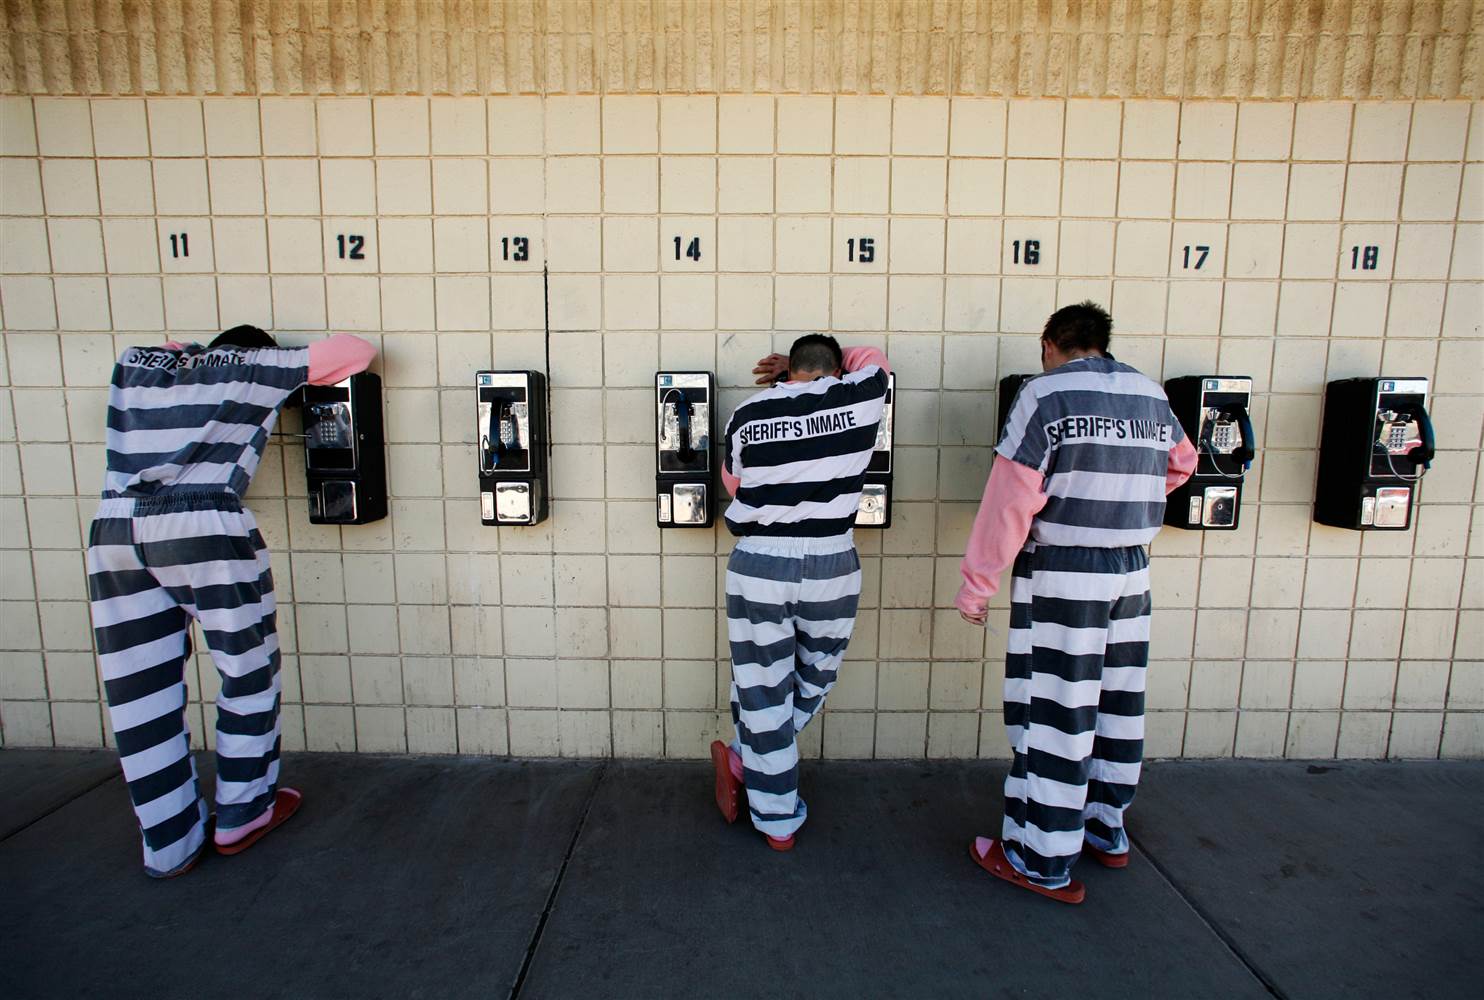 Photo: FCC & Prison Calling Rates, Pigeonly (Courtesy of Google Images)